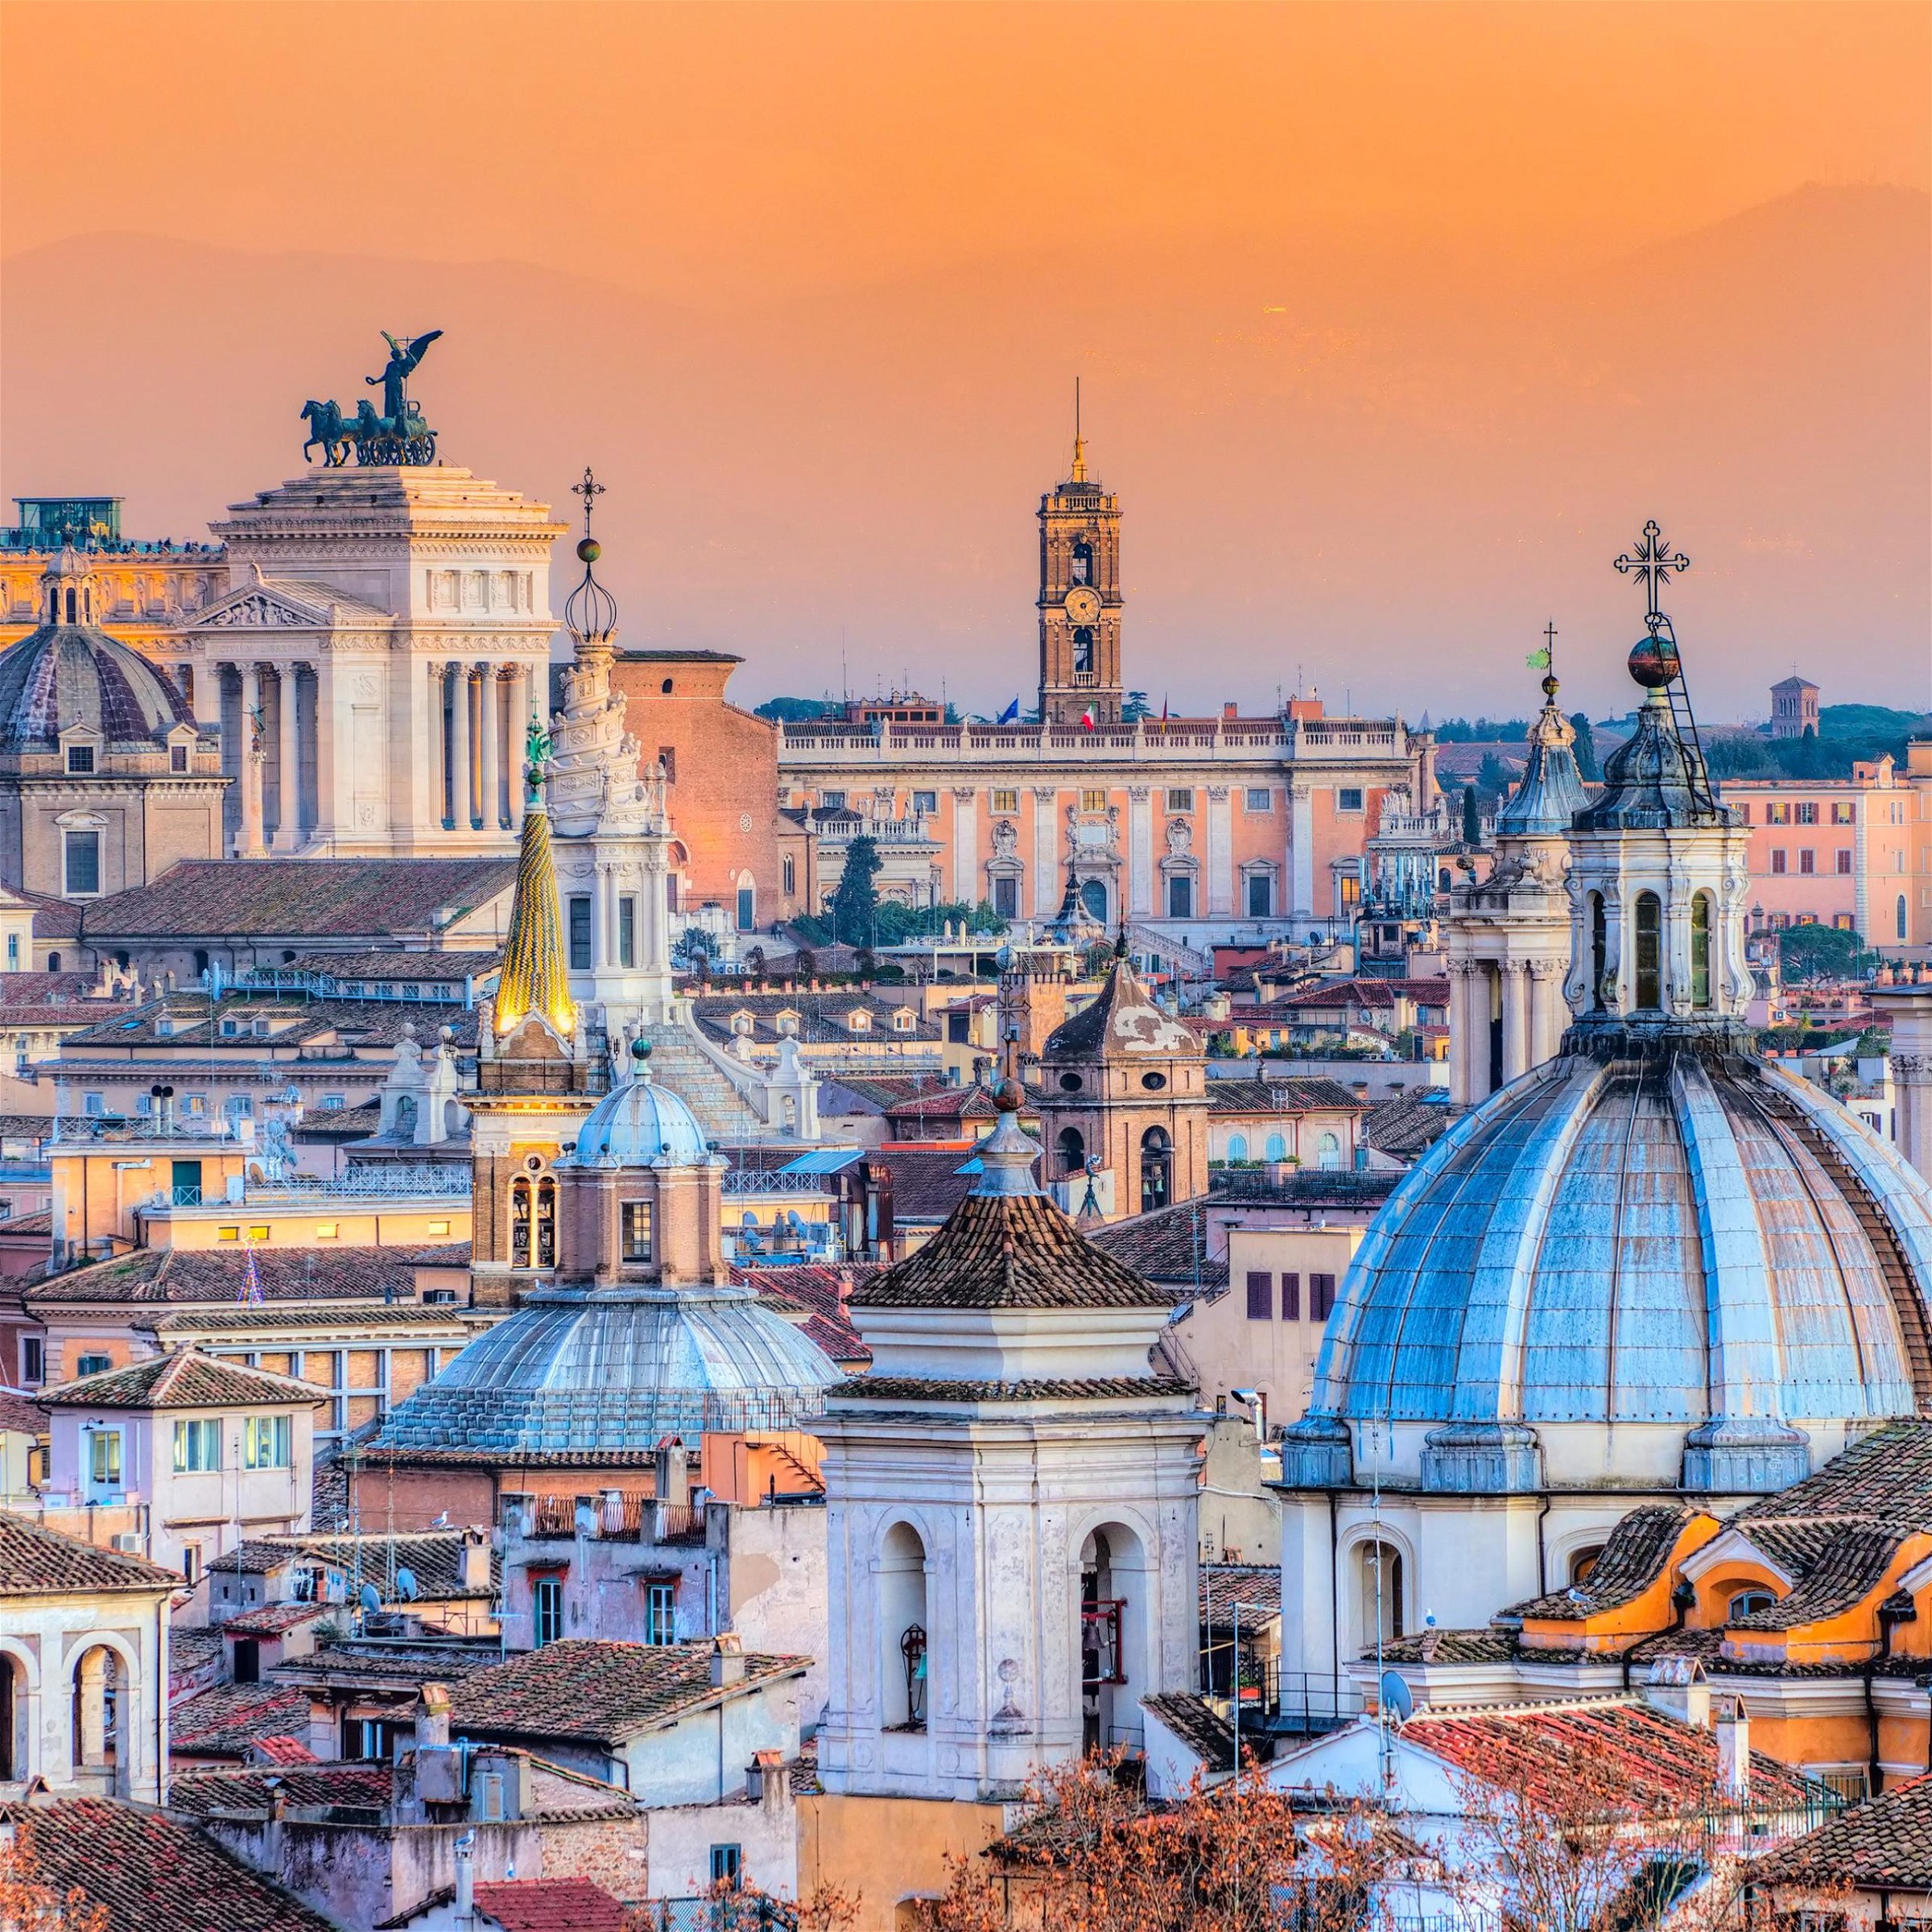 Day 10: All roads lead to Rome – the eternal city. Visit the world’s smallest country – the Vatican City